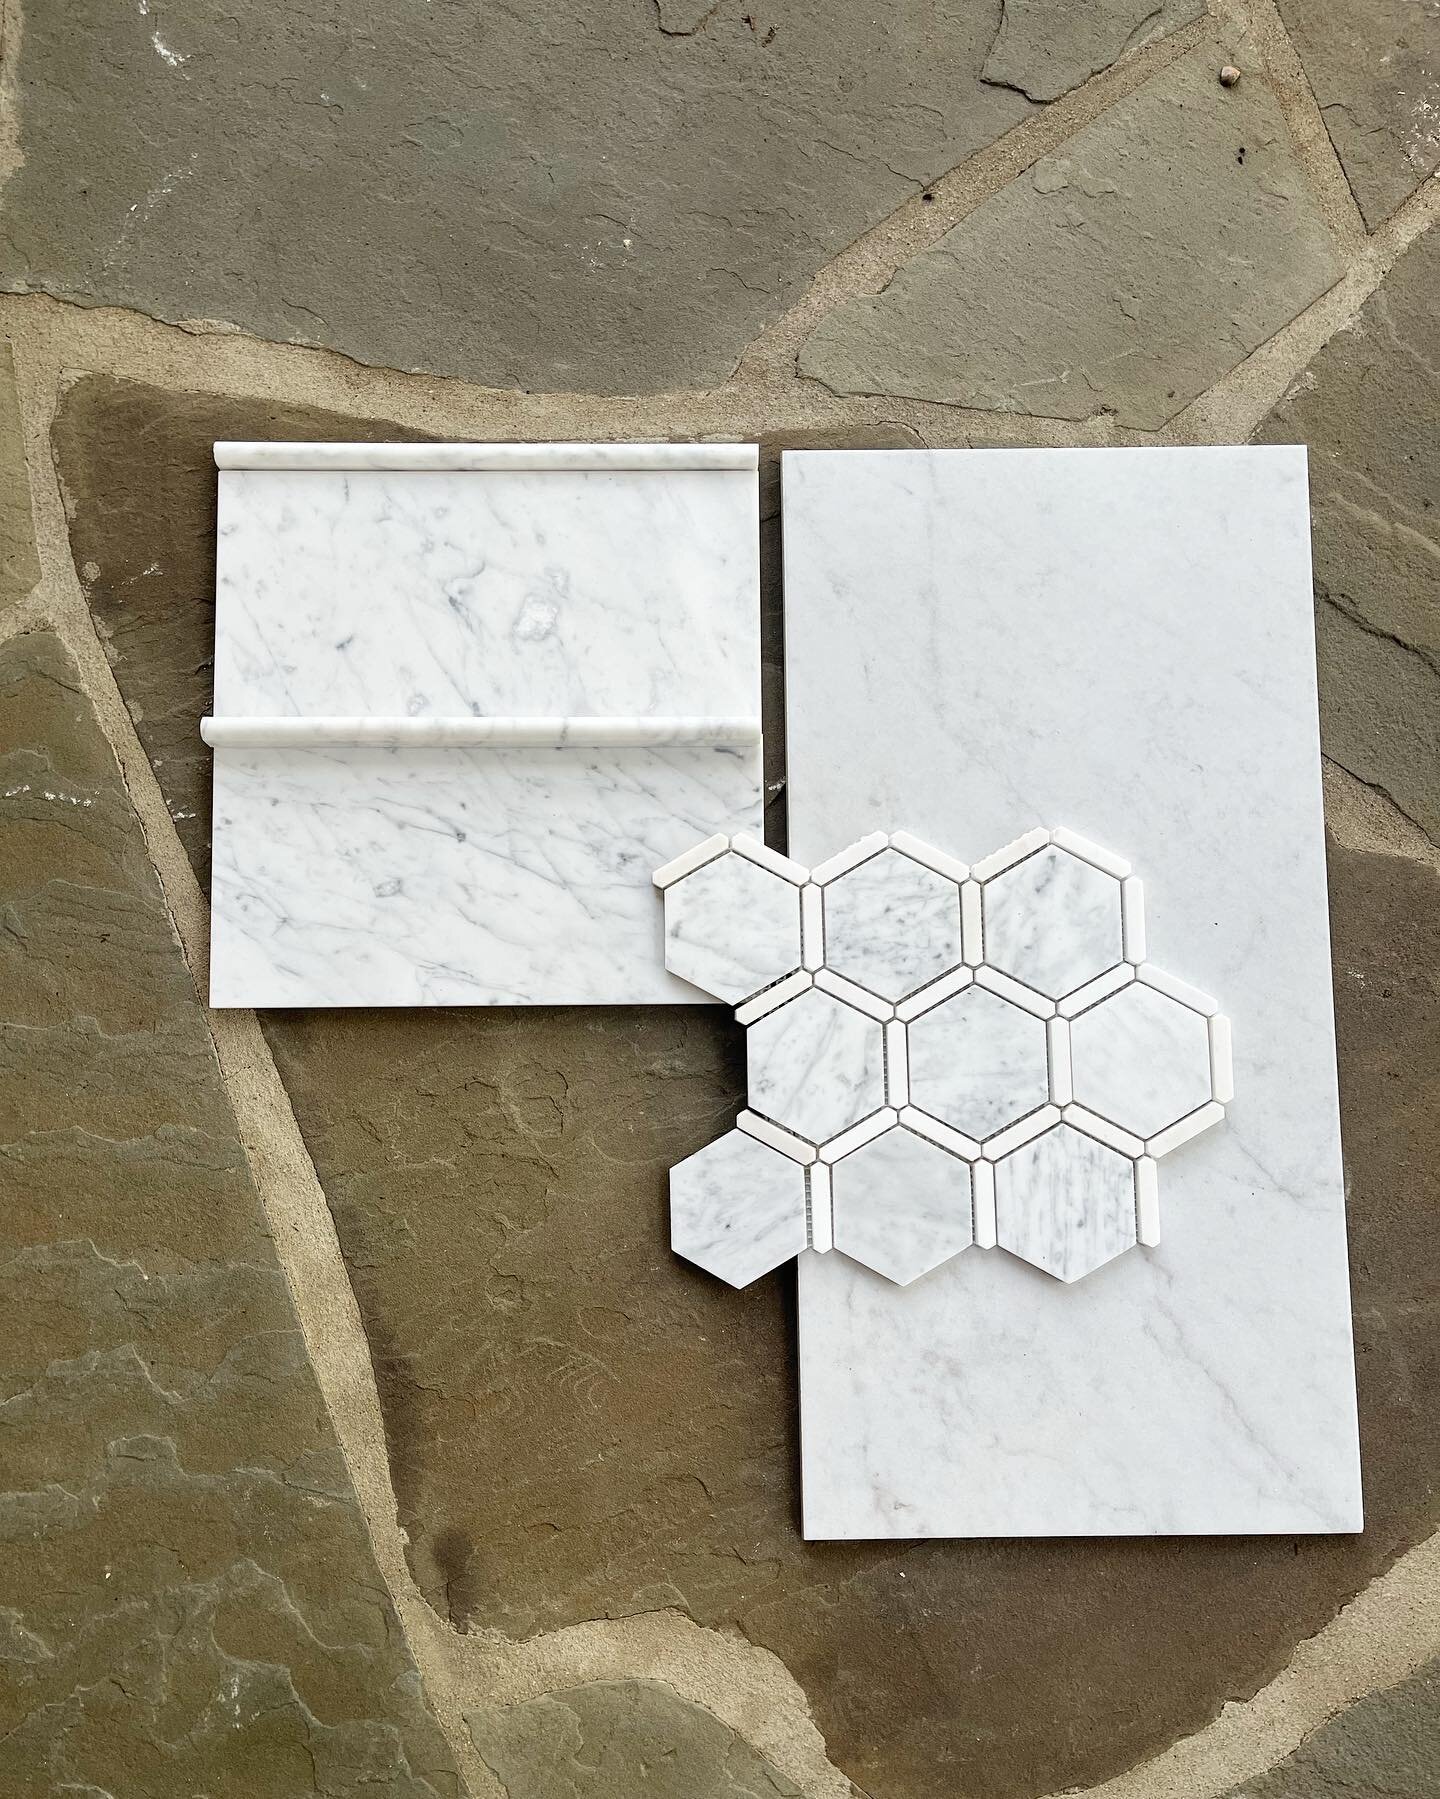 Tile selections for our primary bath reno on our Coley Forest project! 😍 Install is finishing up and we can&rsquo;t wait to see it once all the dust is cleared away. Next up, plumbing fixtures! ✨